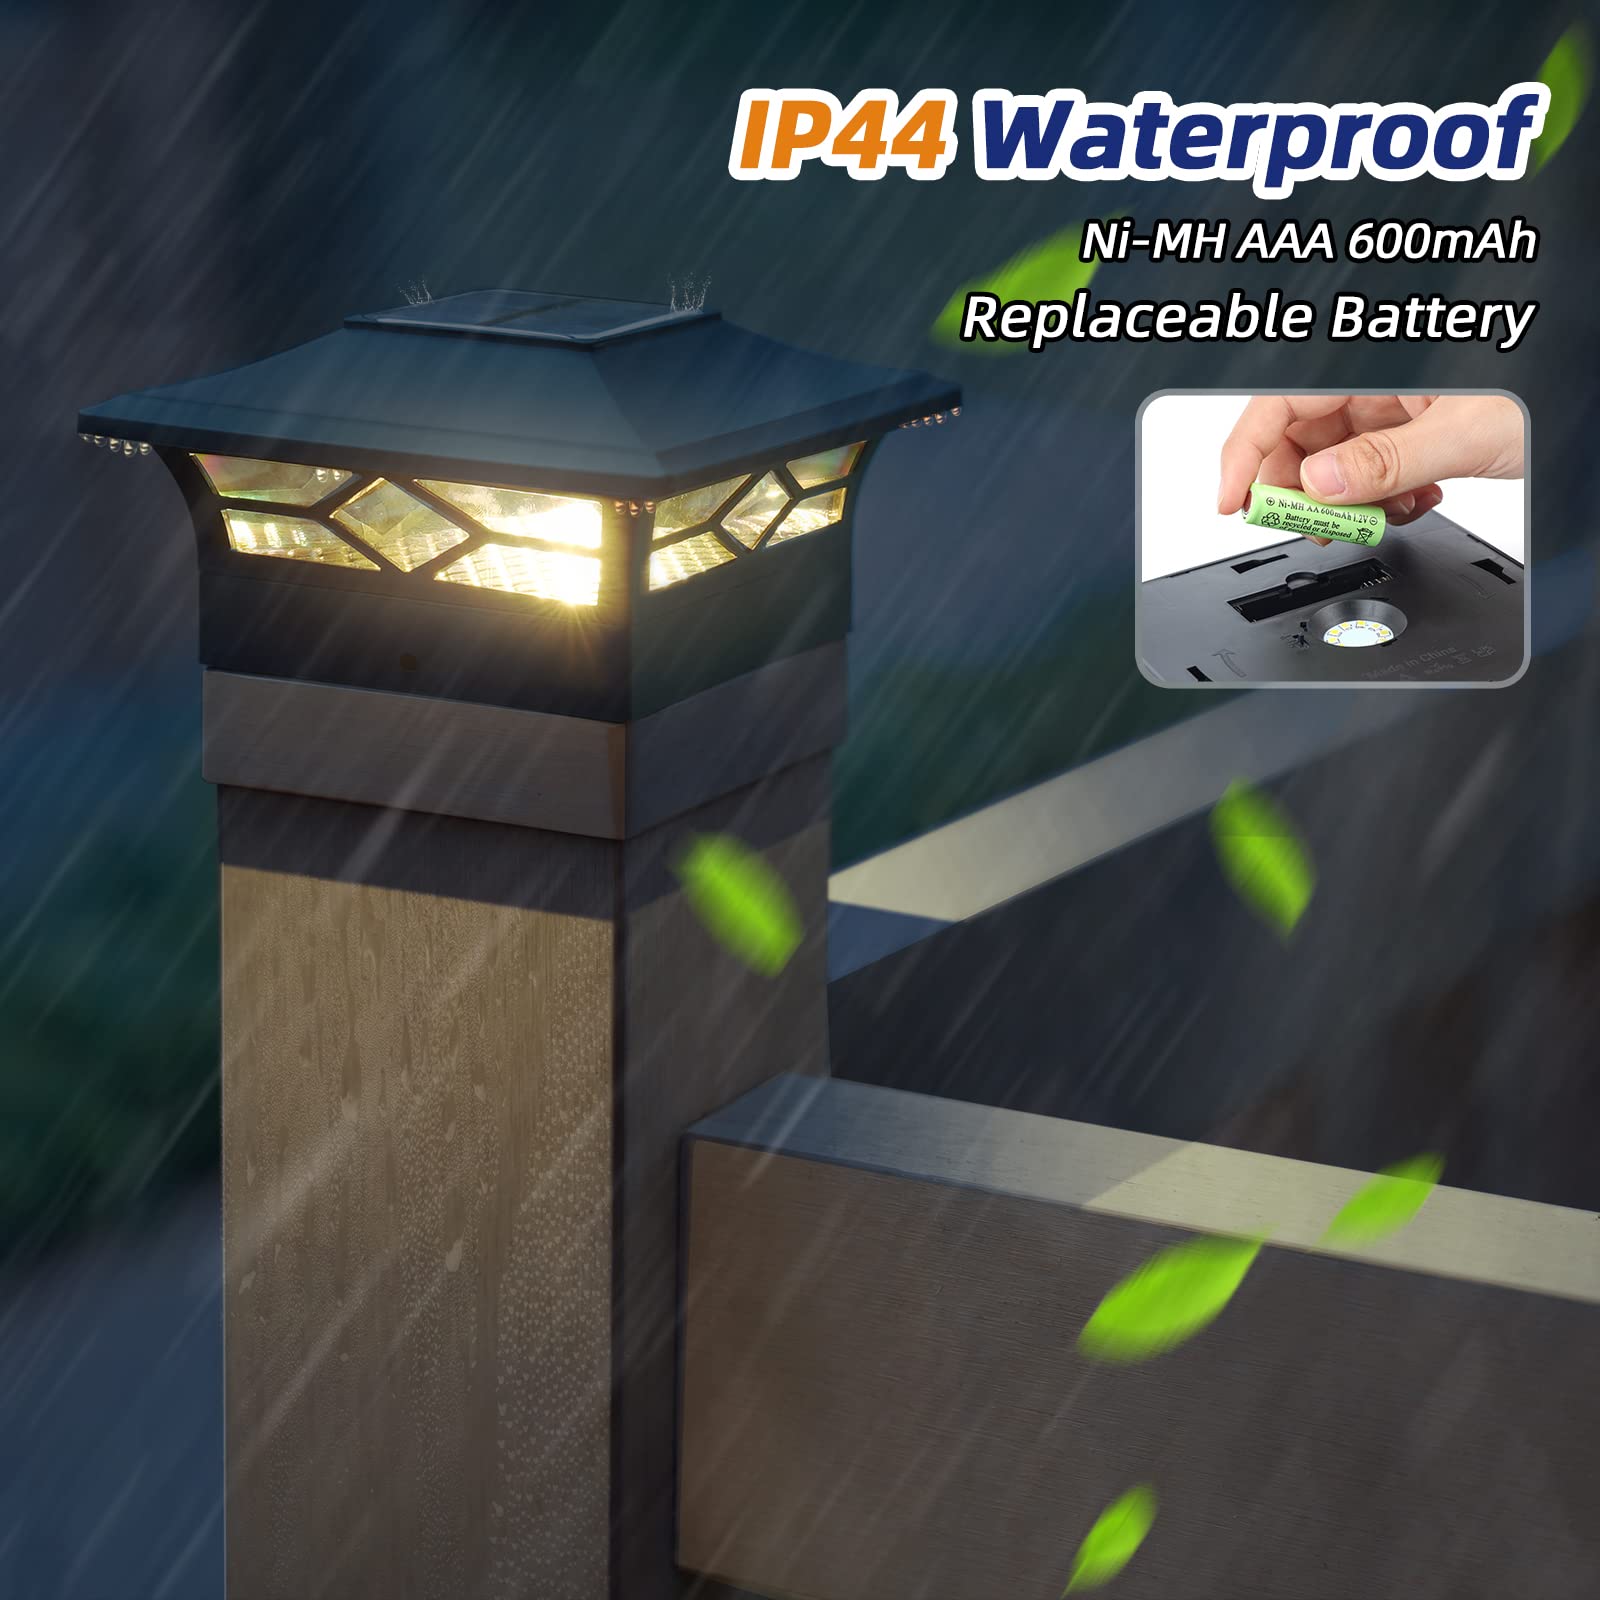 APONUO 4x4 Post Solar Lights,12 Pack 2-Modes bright Solar Post Cap Lights Auto On Off,Outdoor Waterproof Garden Patio Fence Deck Patio Decor for Fence Deck Post Caps 4x4 6x6 Wood,4x4 Vinyl